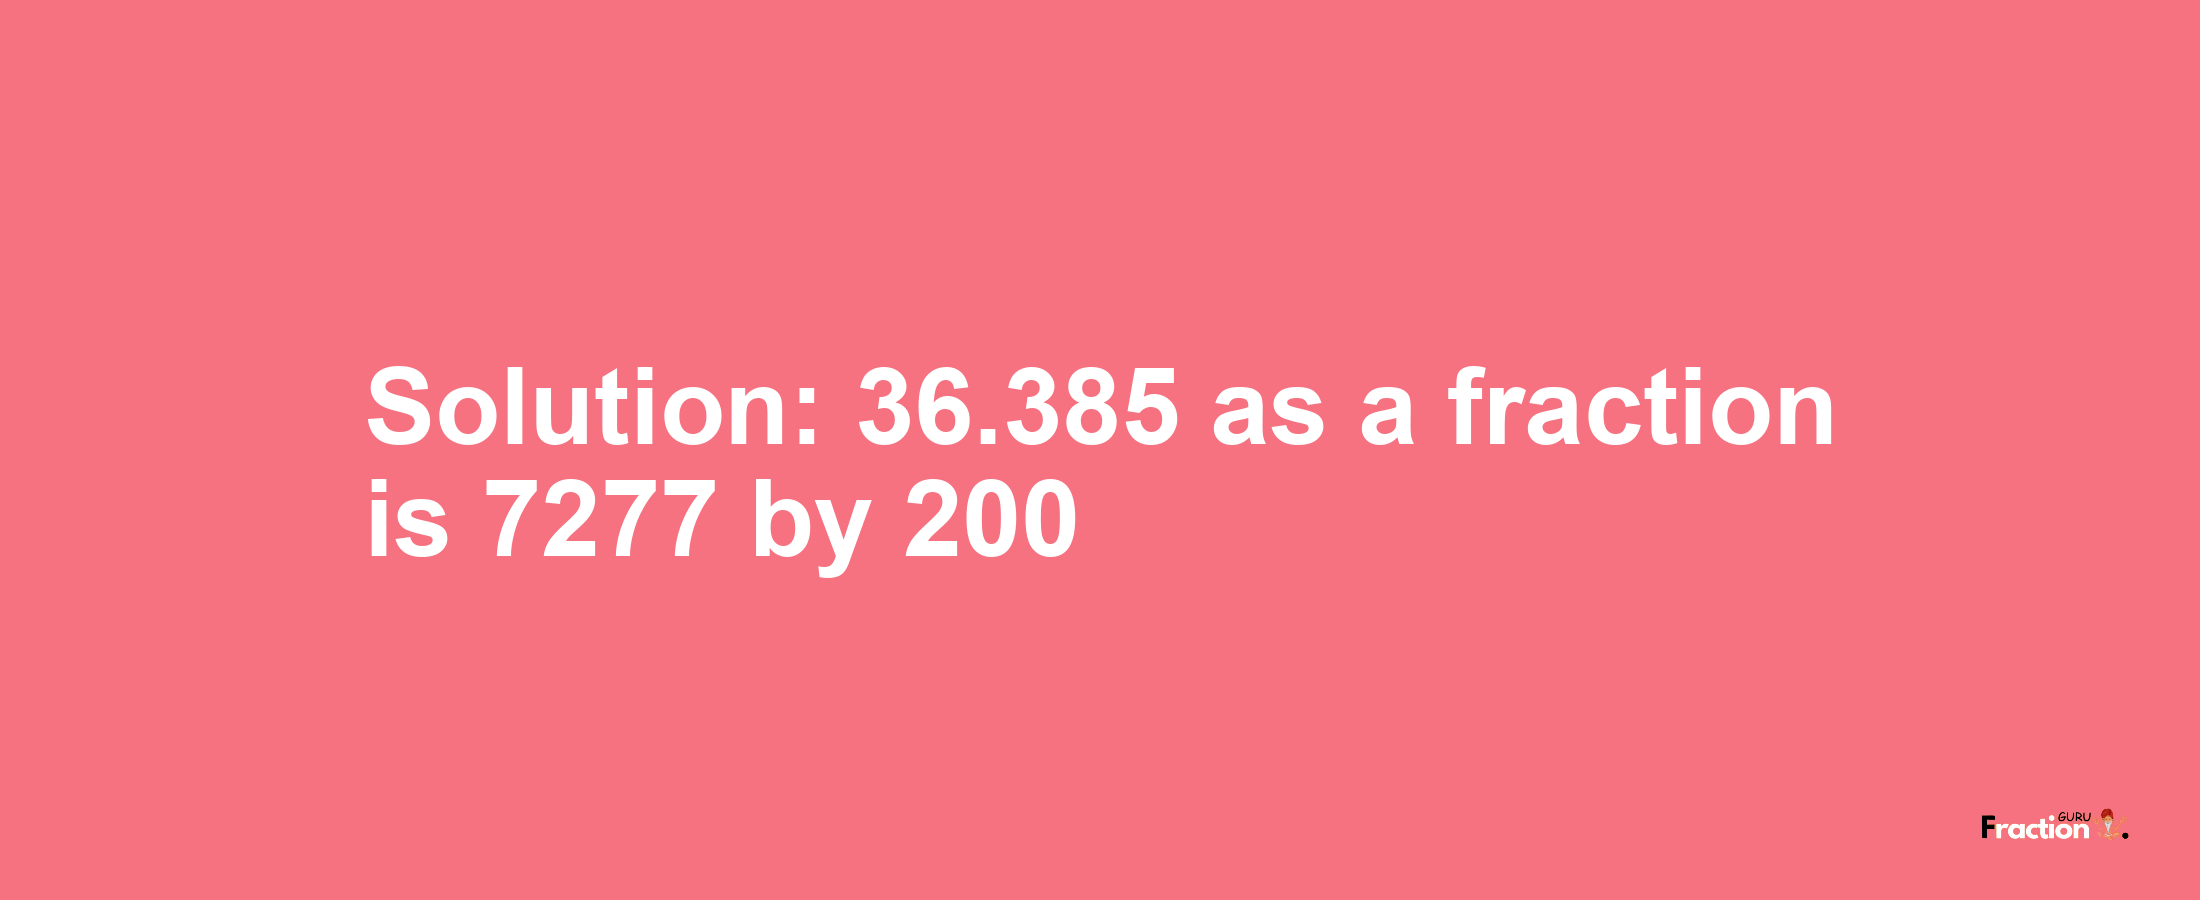 Solution:36.385 as a fraction is 7277/200